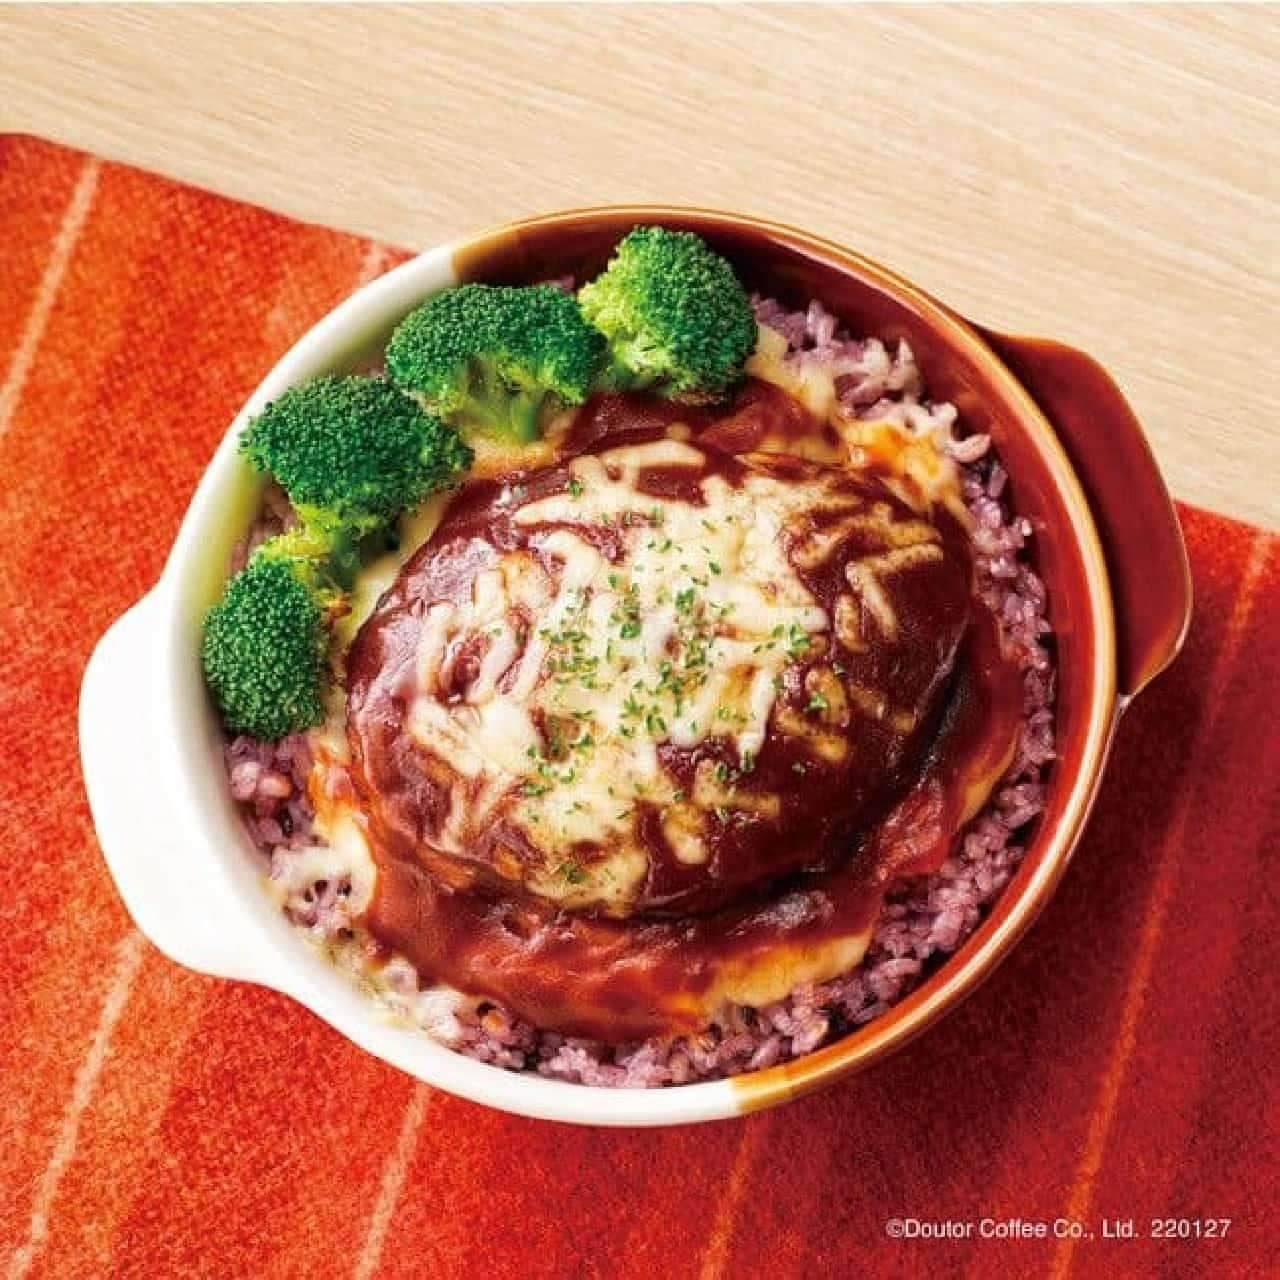 Excelsior Cafe "Red Wine Fragrant Cheese Hamburger Doria"